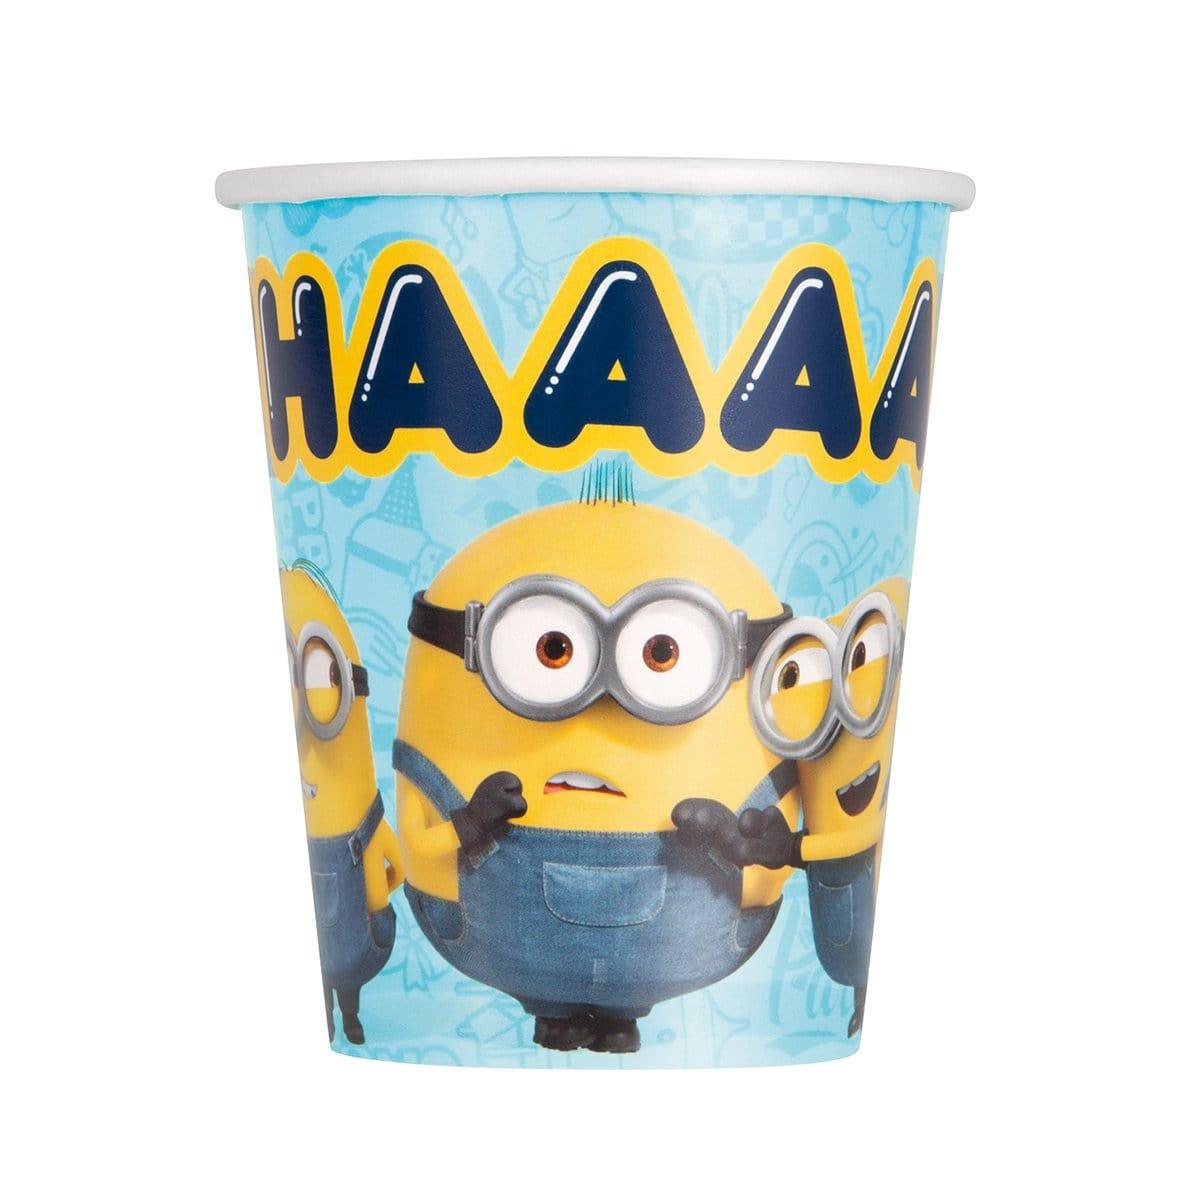 Buy Kids Birthday Minions Paper Cups 9 Ounces, 8 Counts sold at Party Expert